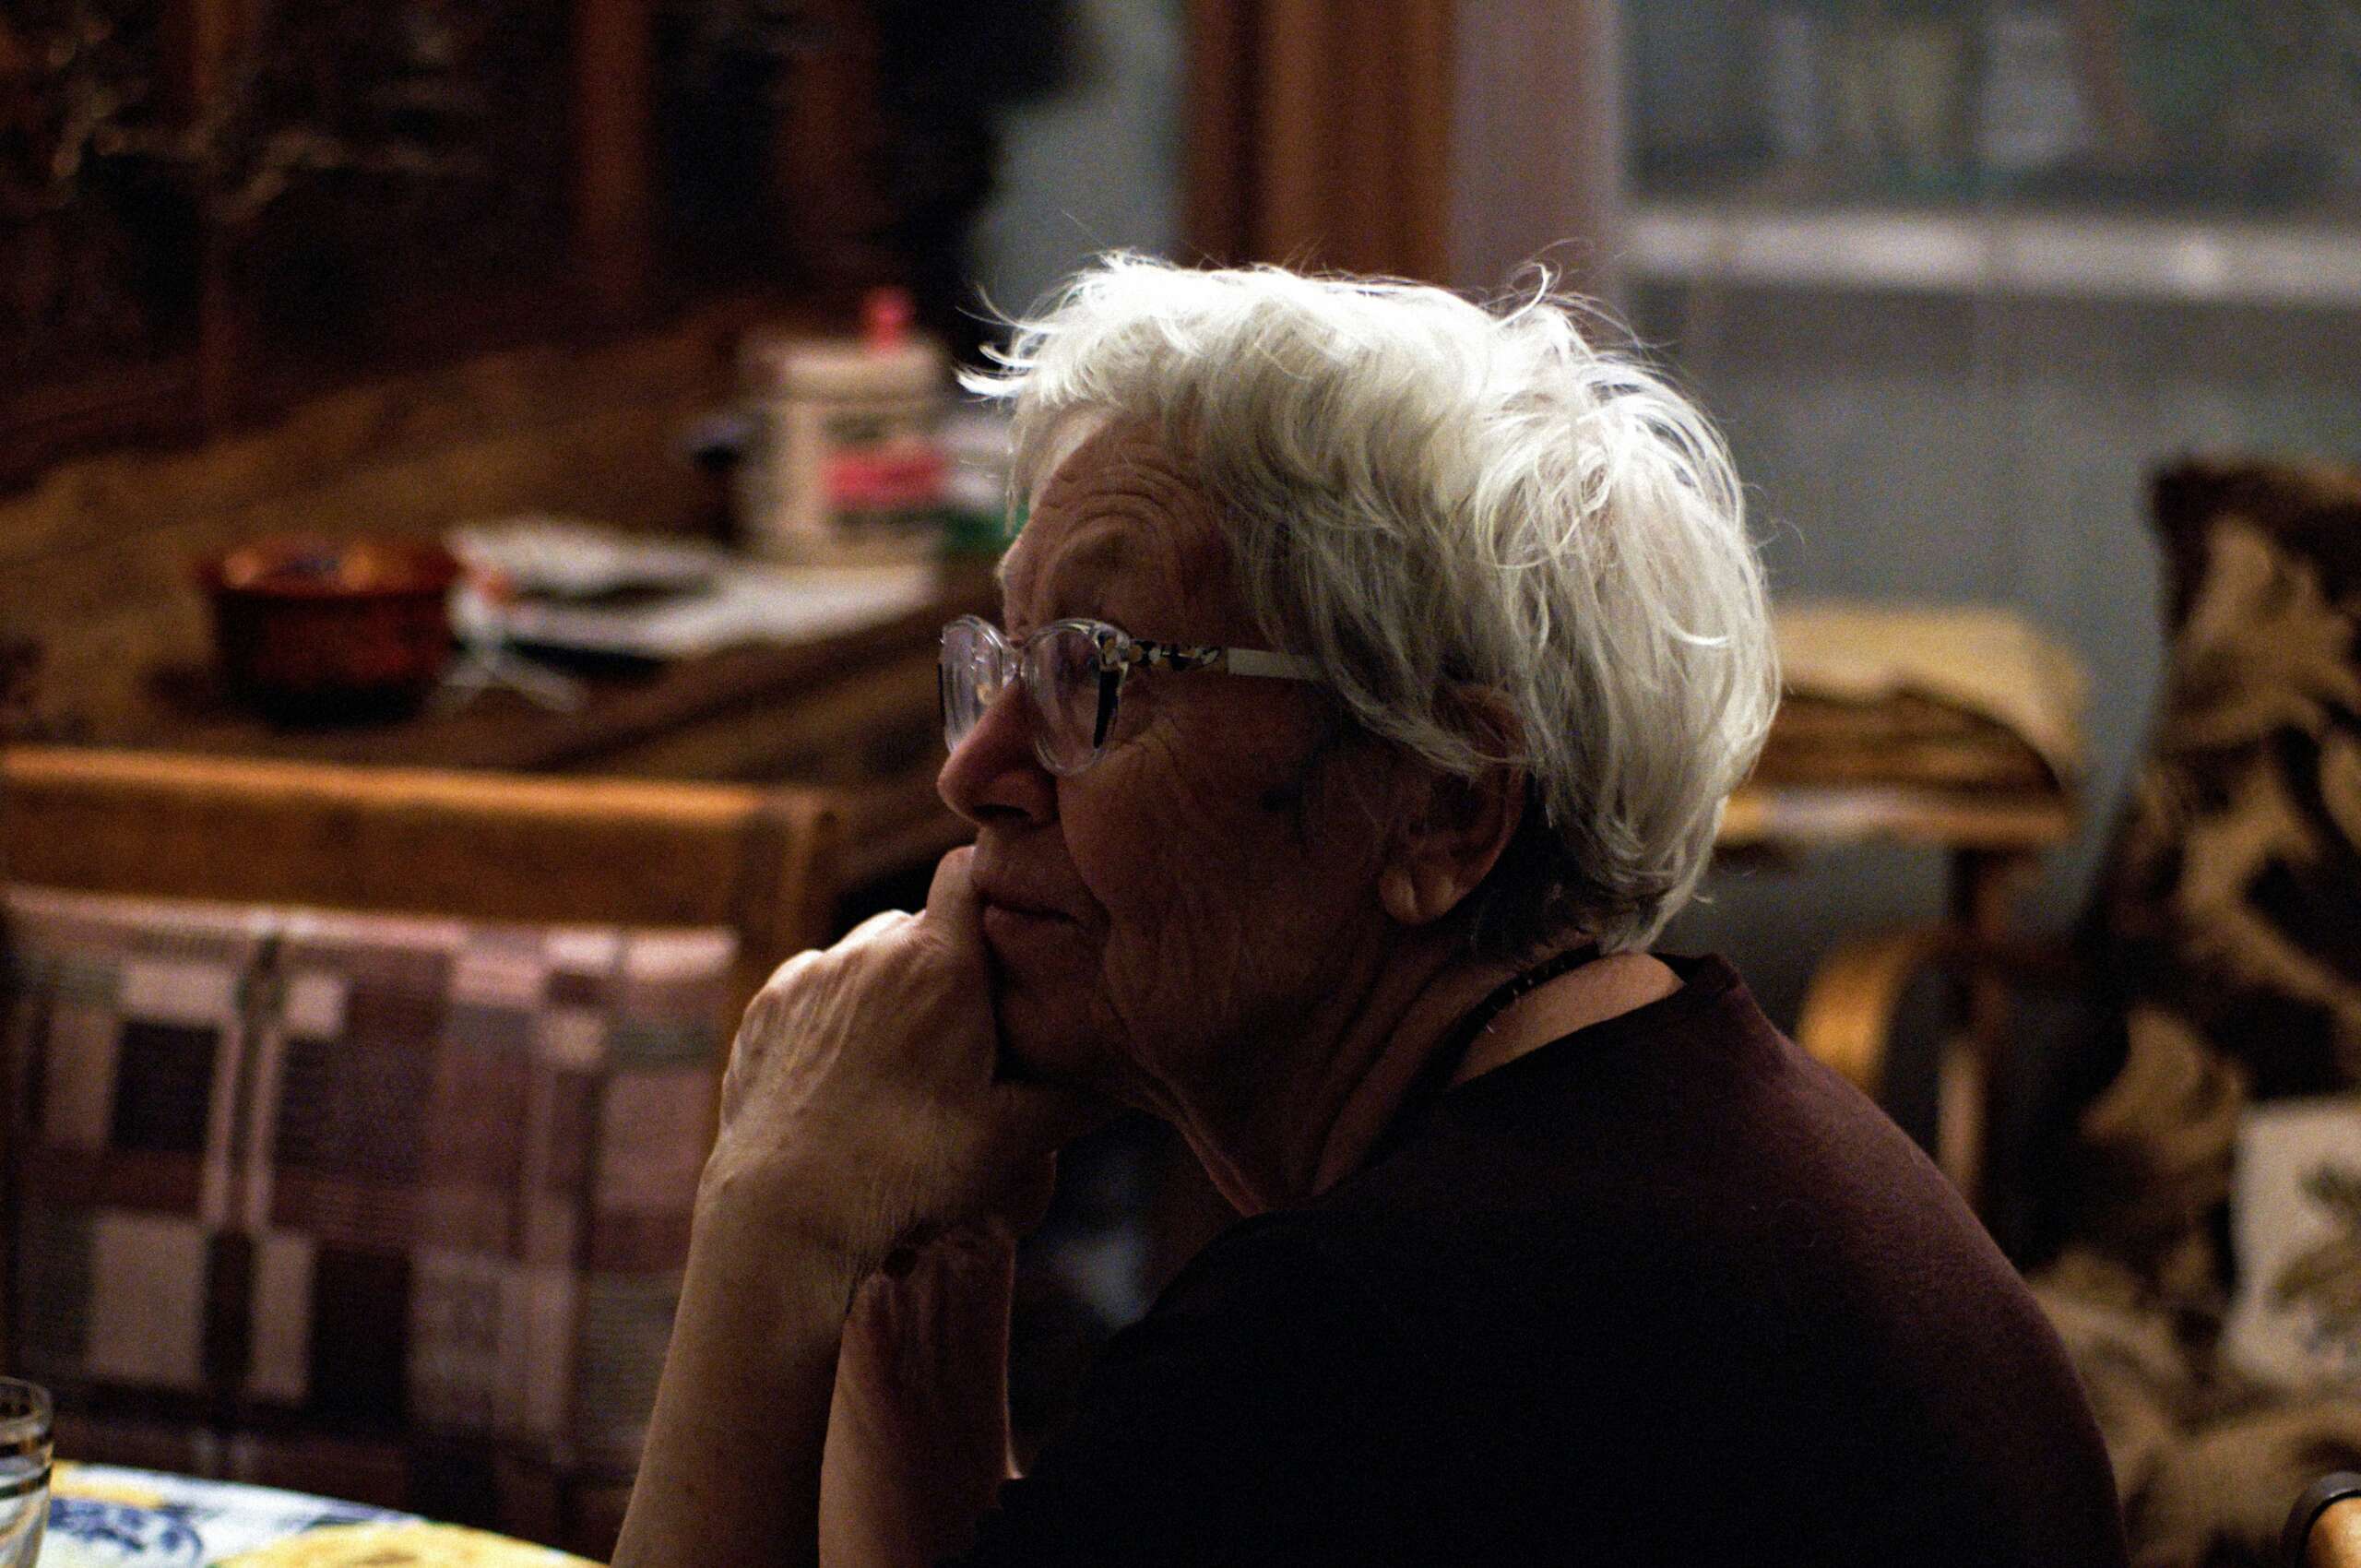 An image of an elderly woman sitting at a table with her face in her hands.